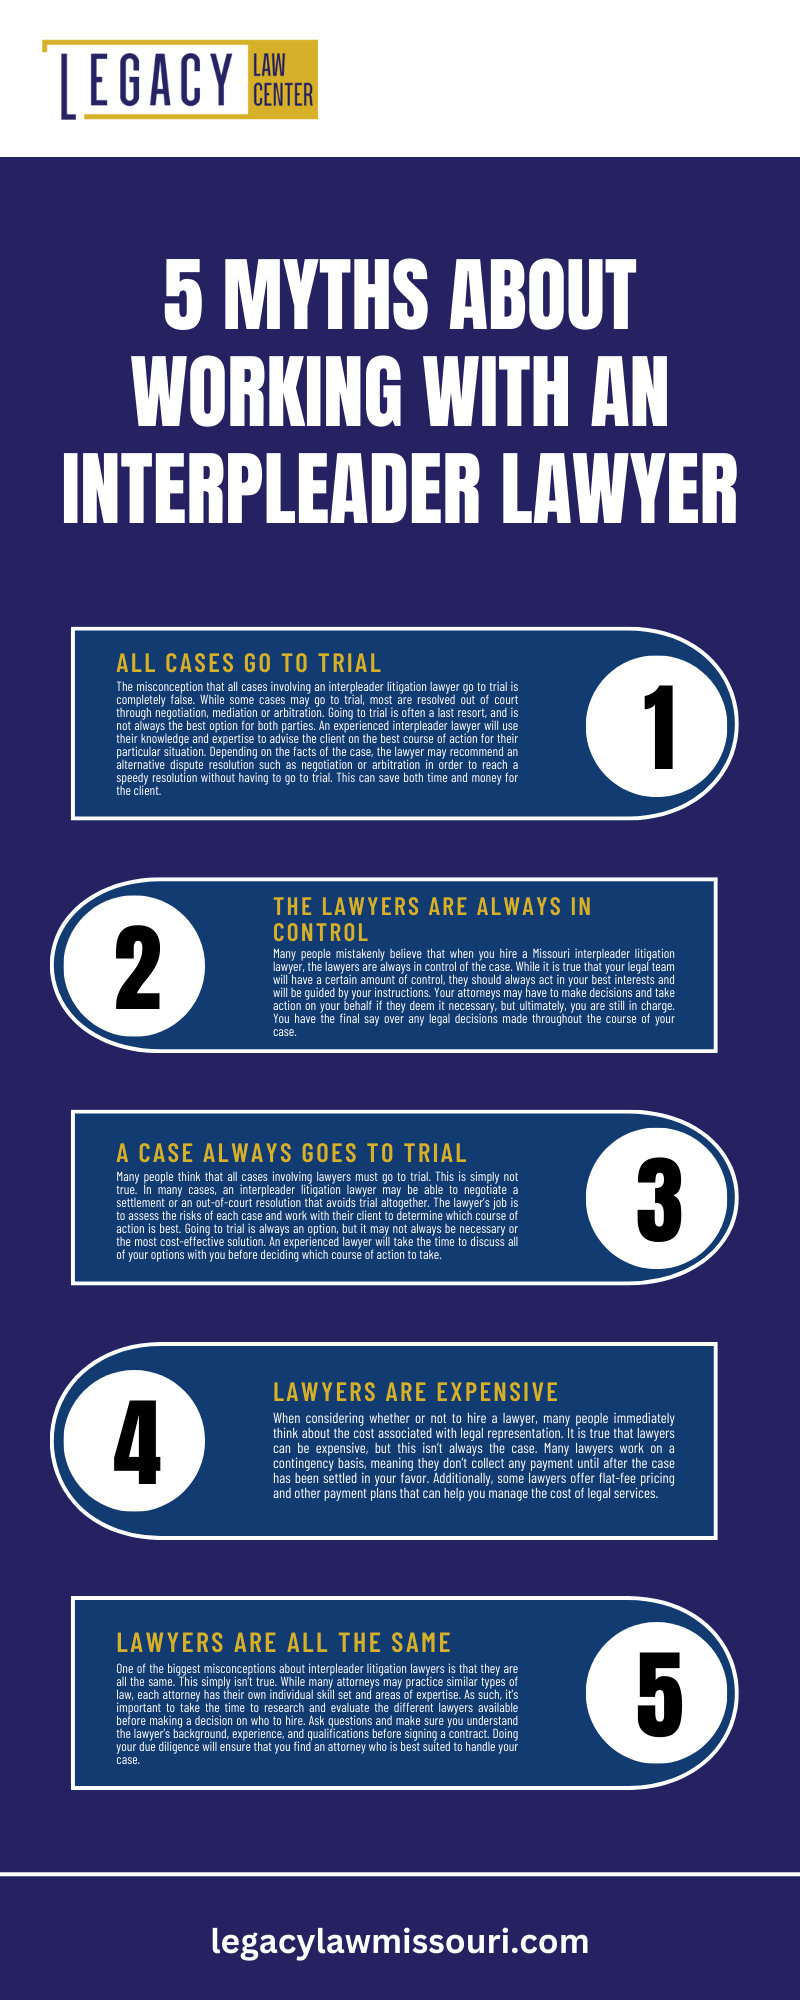 5 Myths About Working With An Interpleader Lawyer Infographic